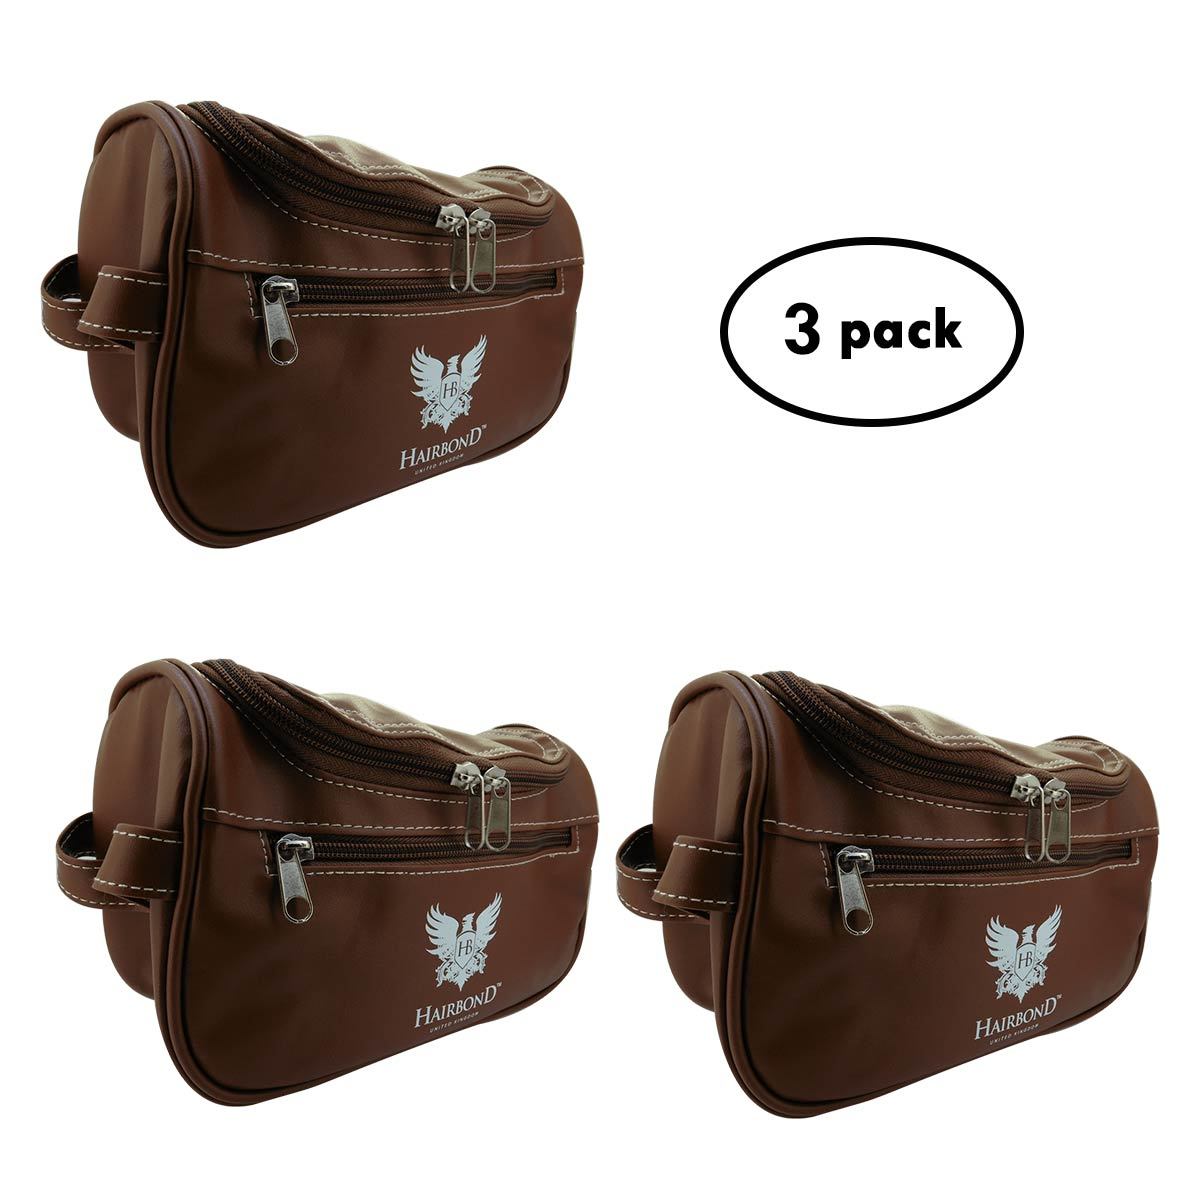 Primary image of Wash Bag 3 Pack